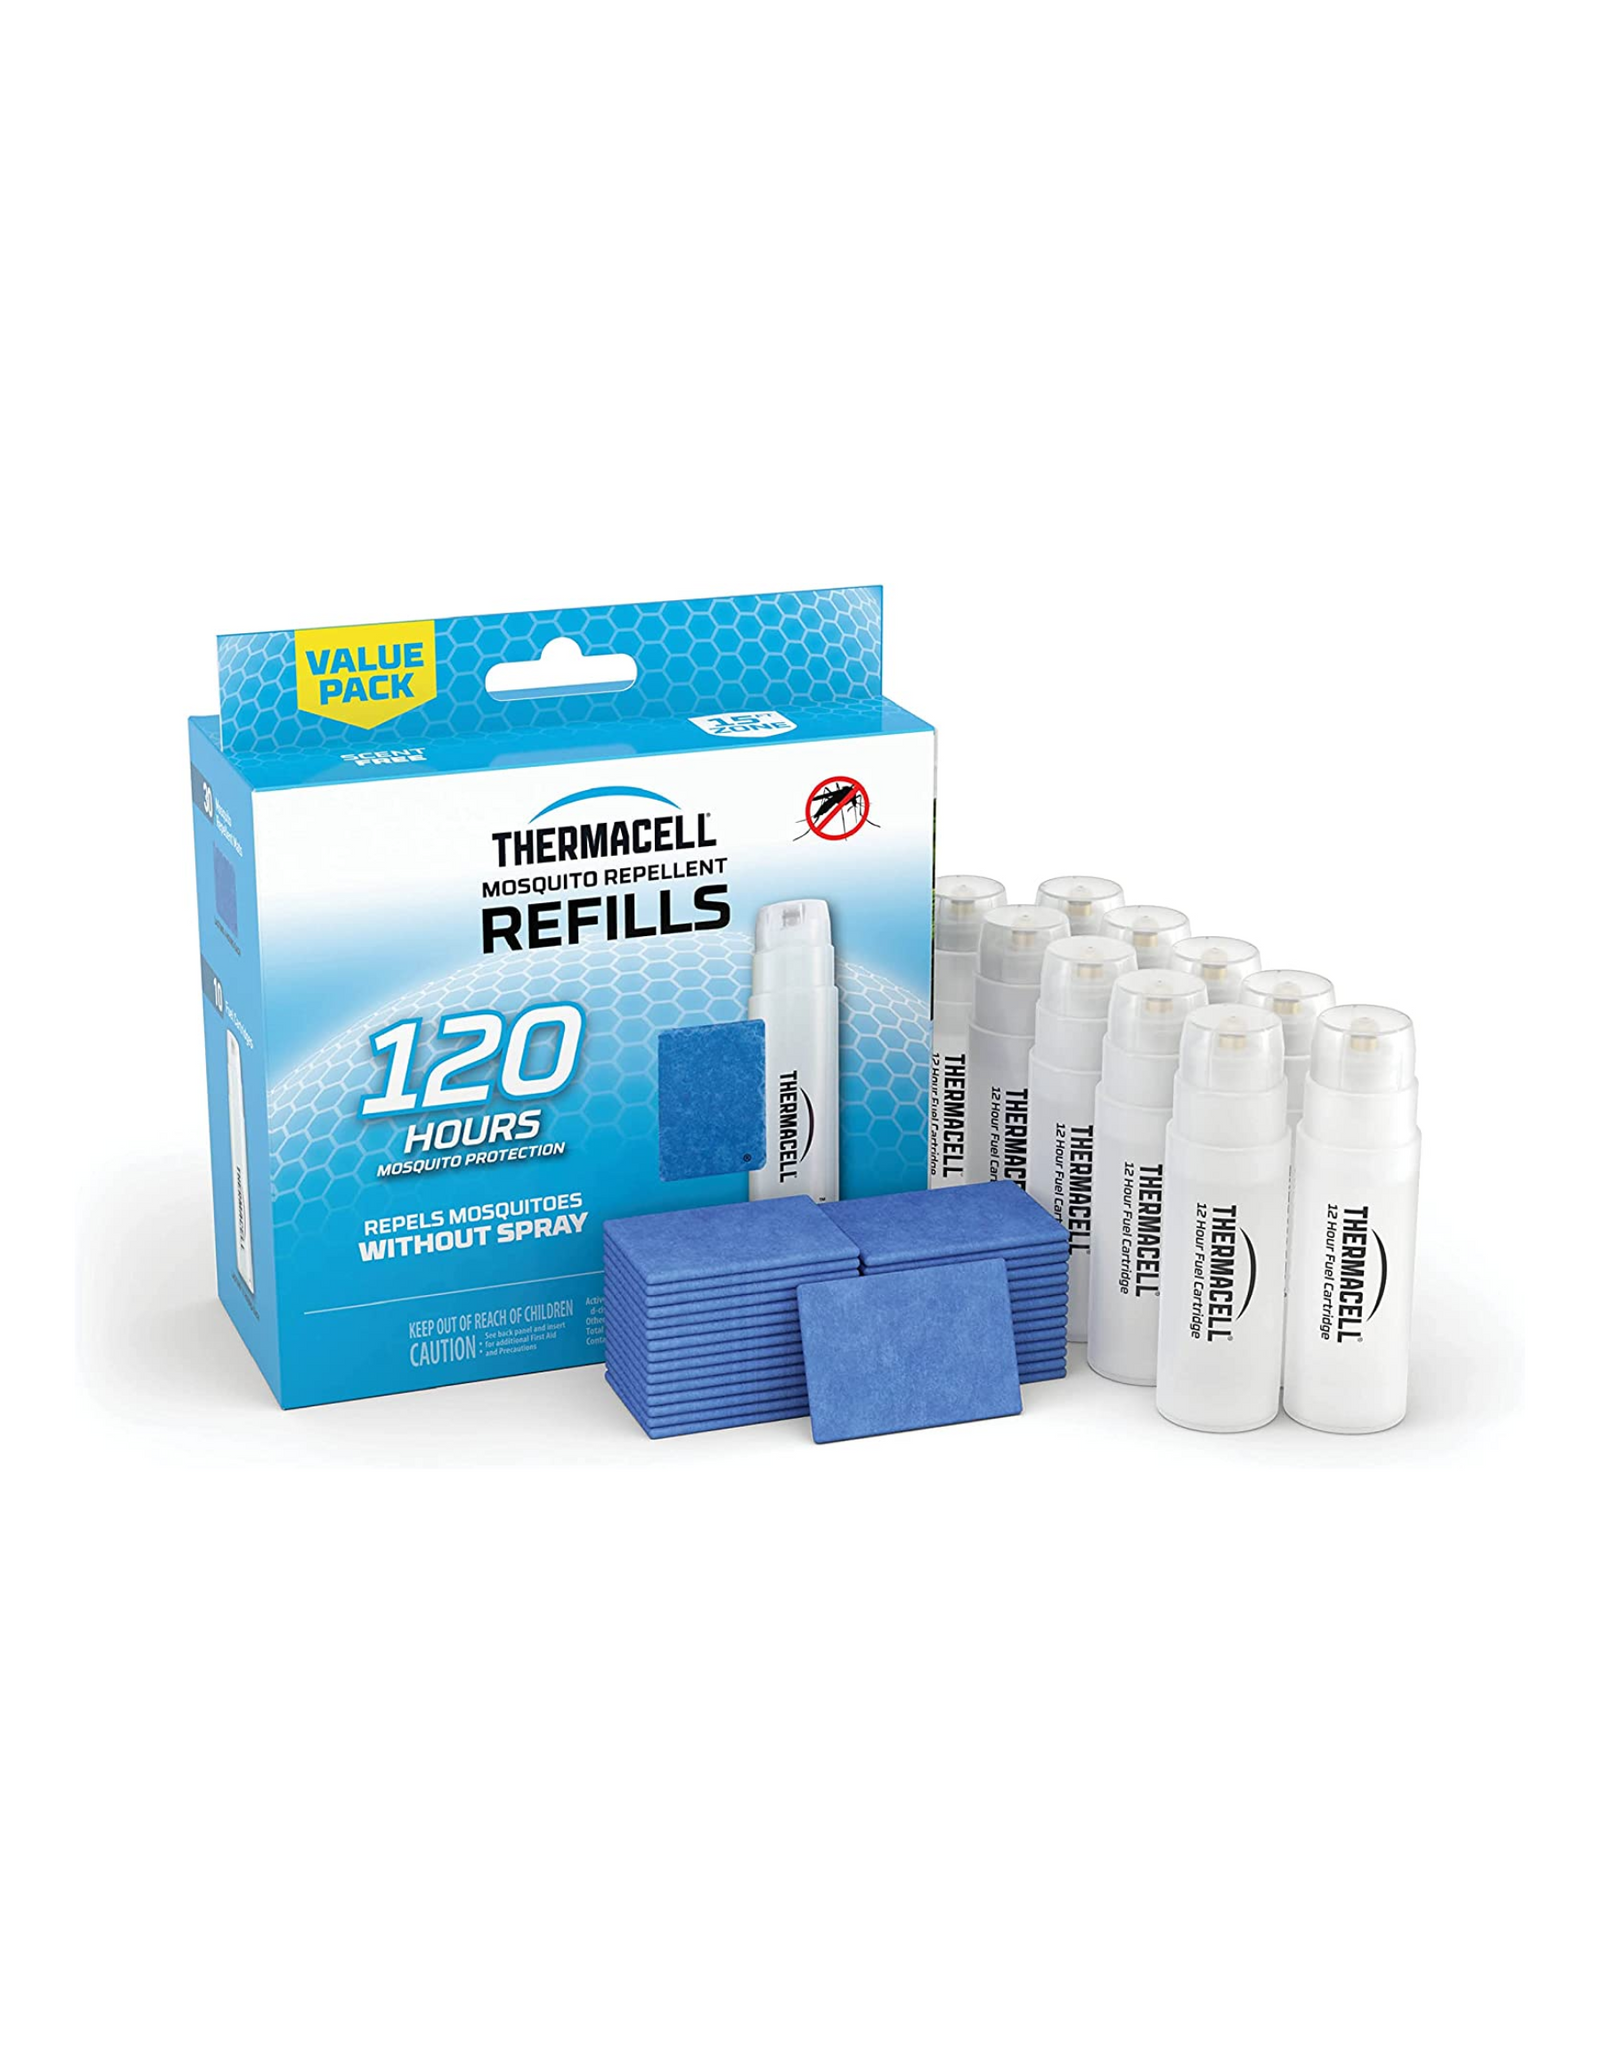 Thermacell Mosquito Repellent Refills; Compatible with Any Fuel-Powered Thermacell Repeller, 120 Hours Mosquito Protection, Original Scent-Free